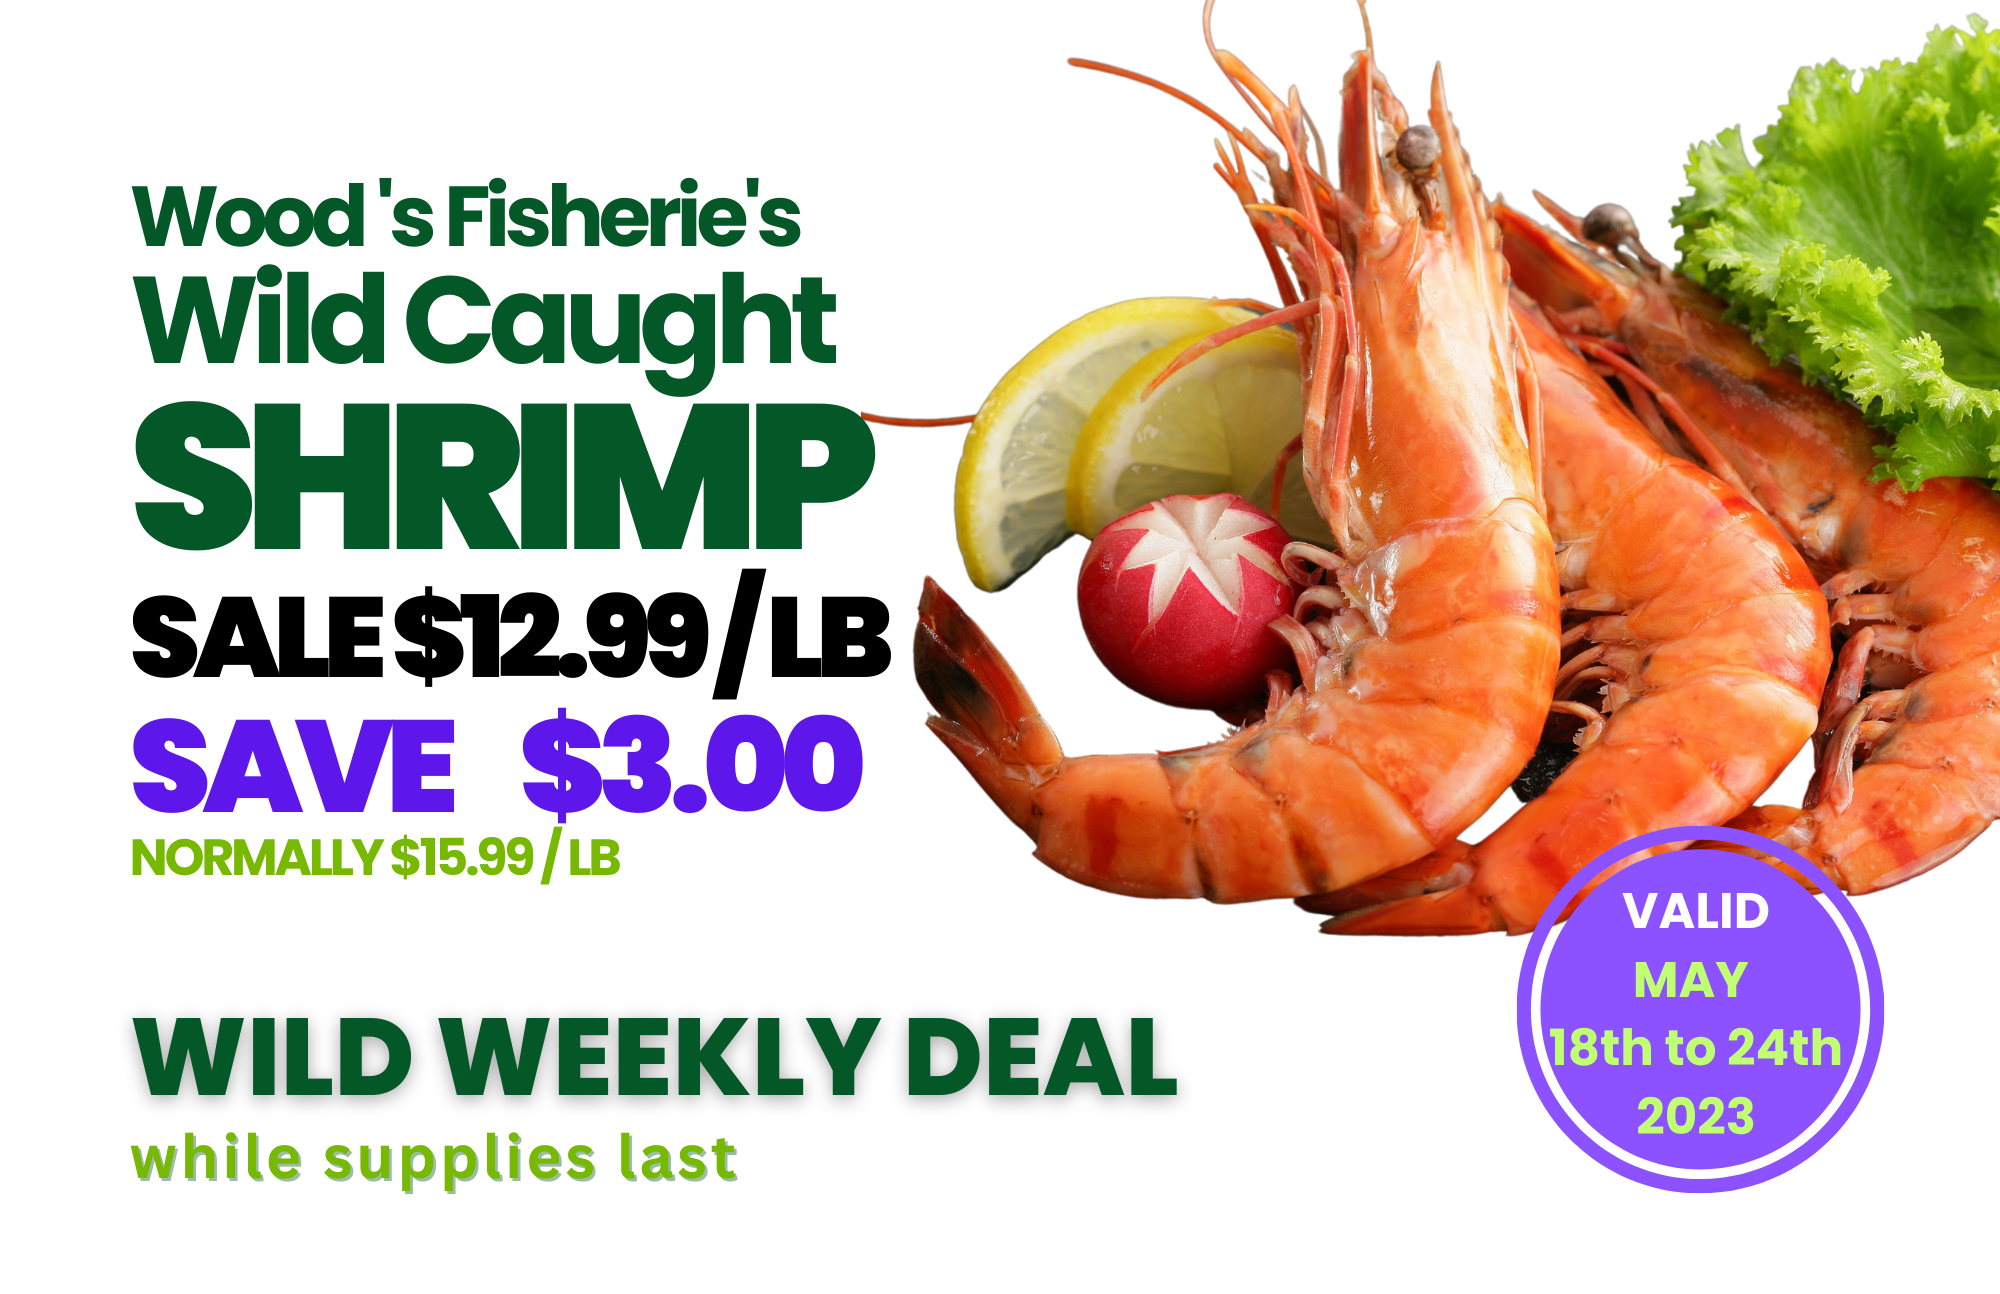 Wild Oats Market Williamstown MA Weekly Deals May 18-24 2023 Shrimp.png